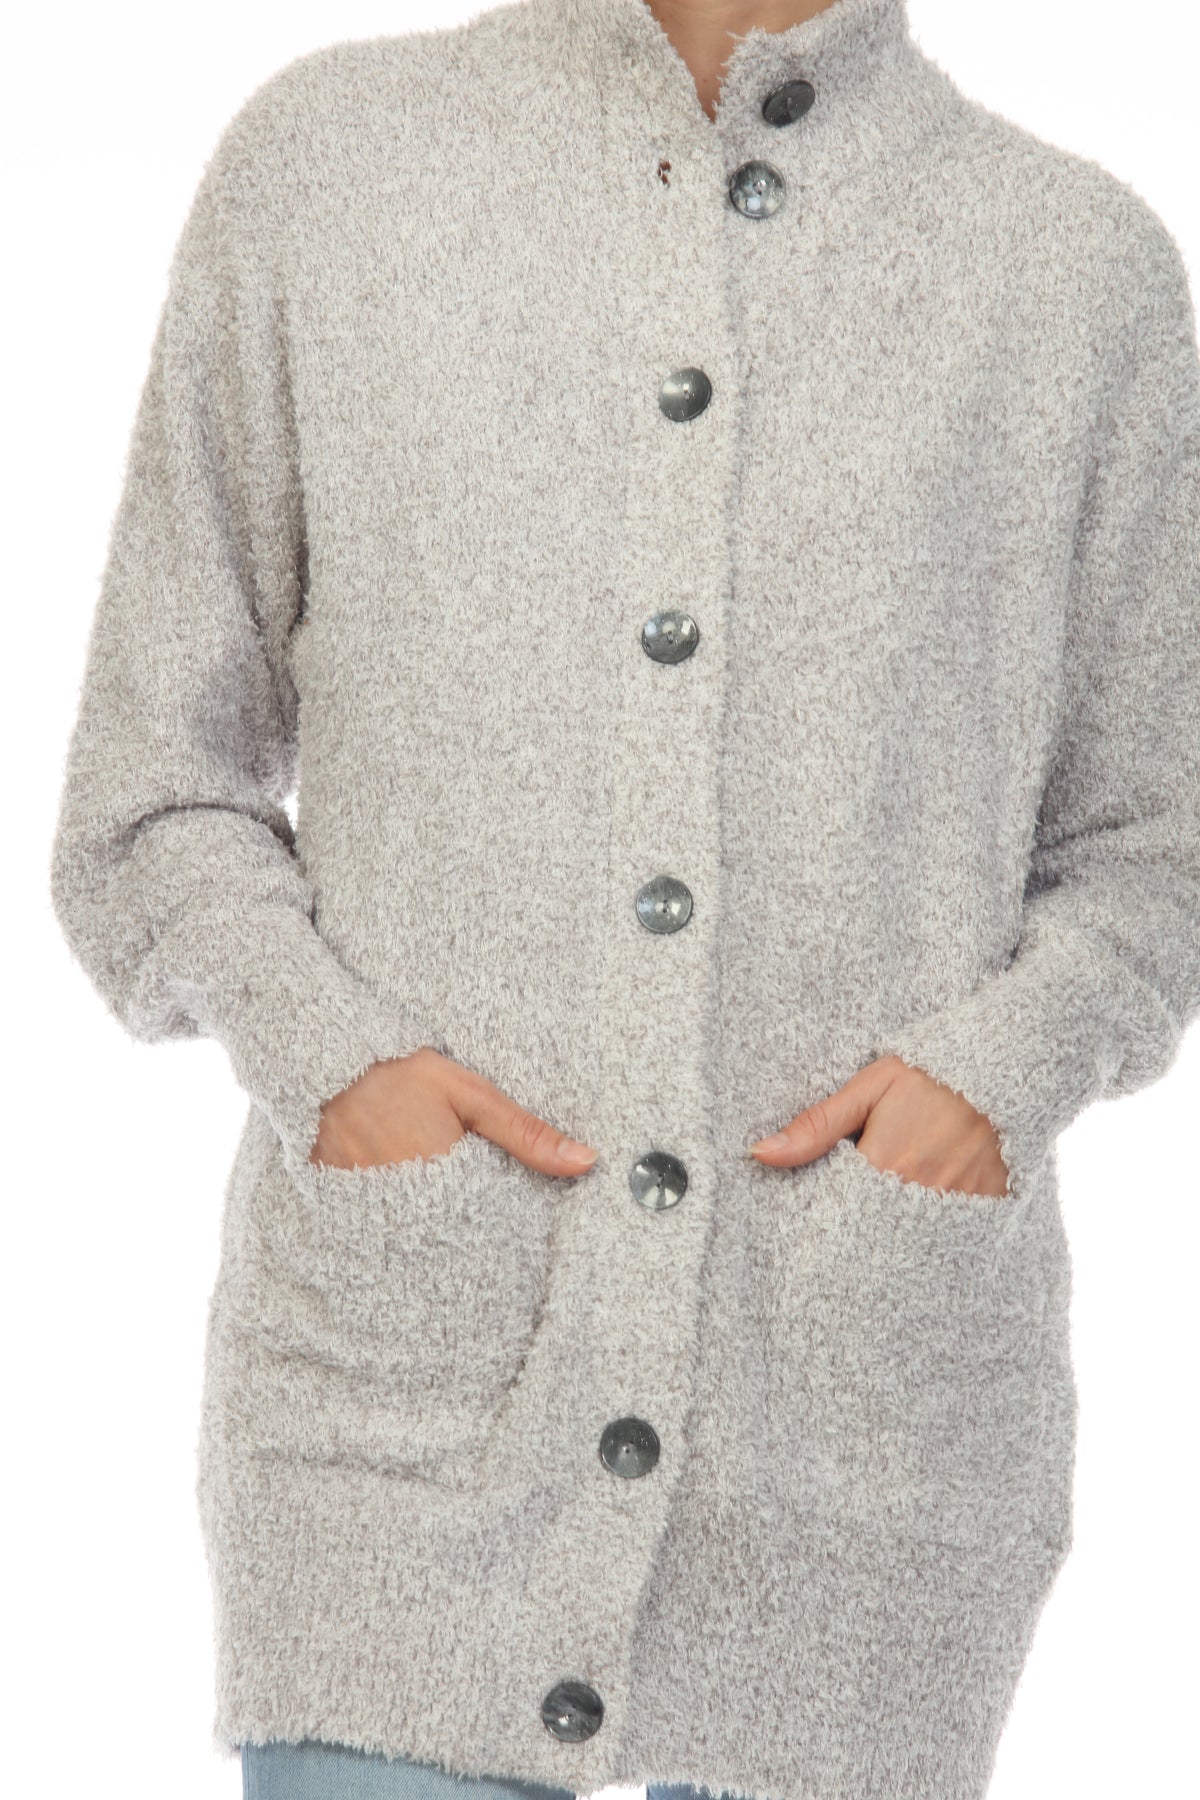 BUTTON FRONT LONG CARDIGAN